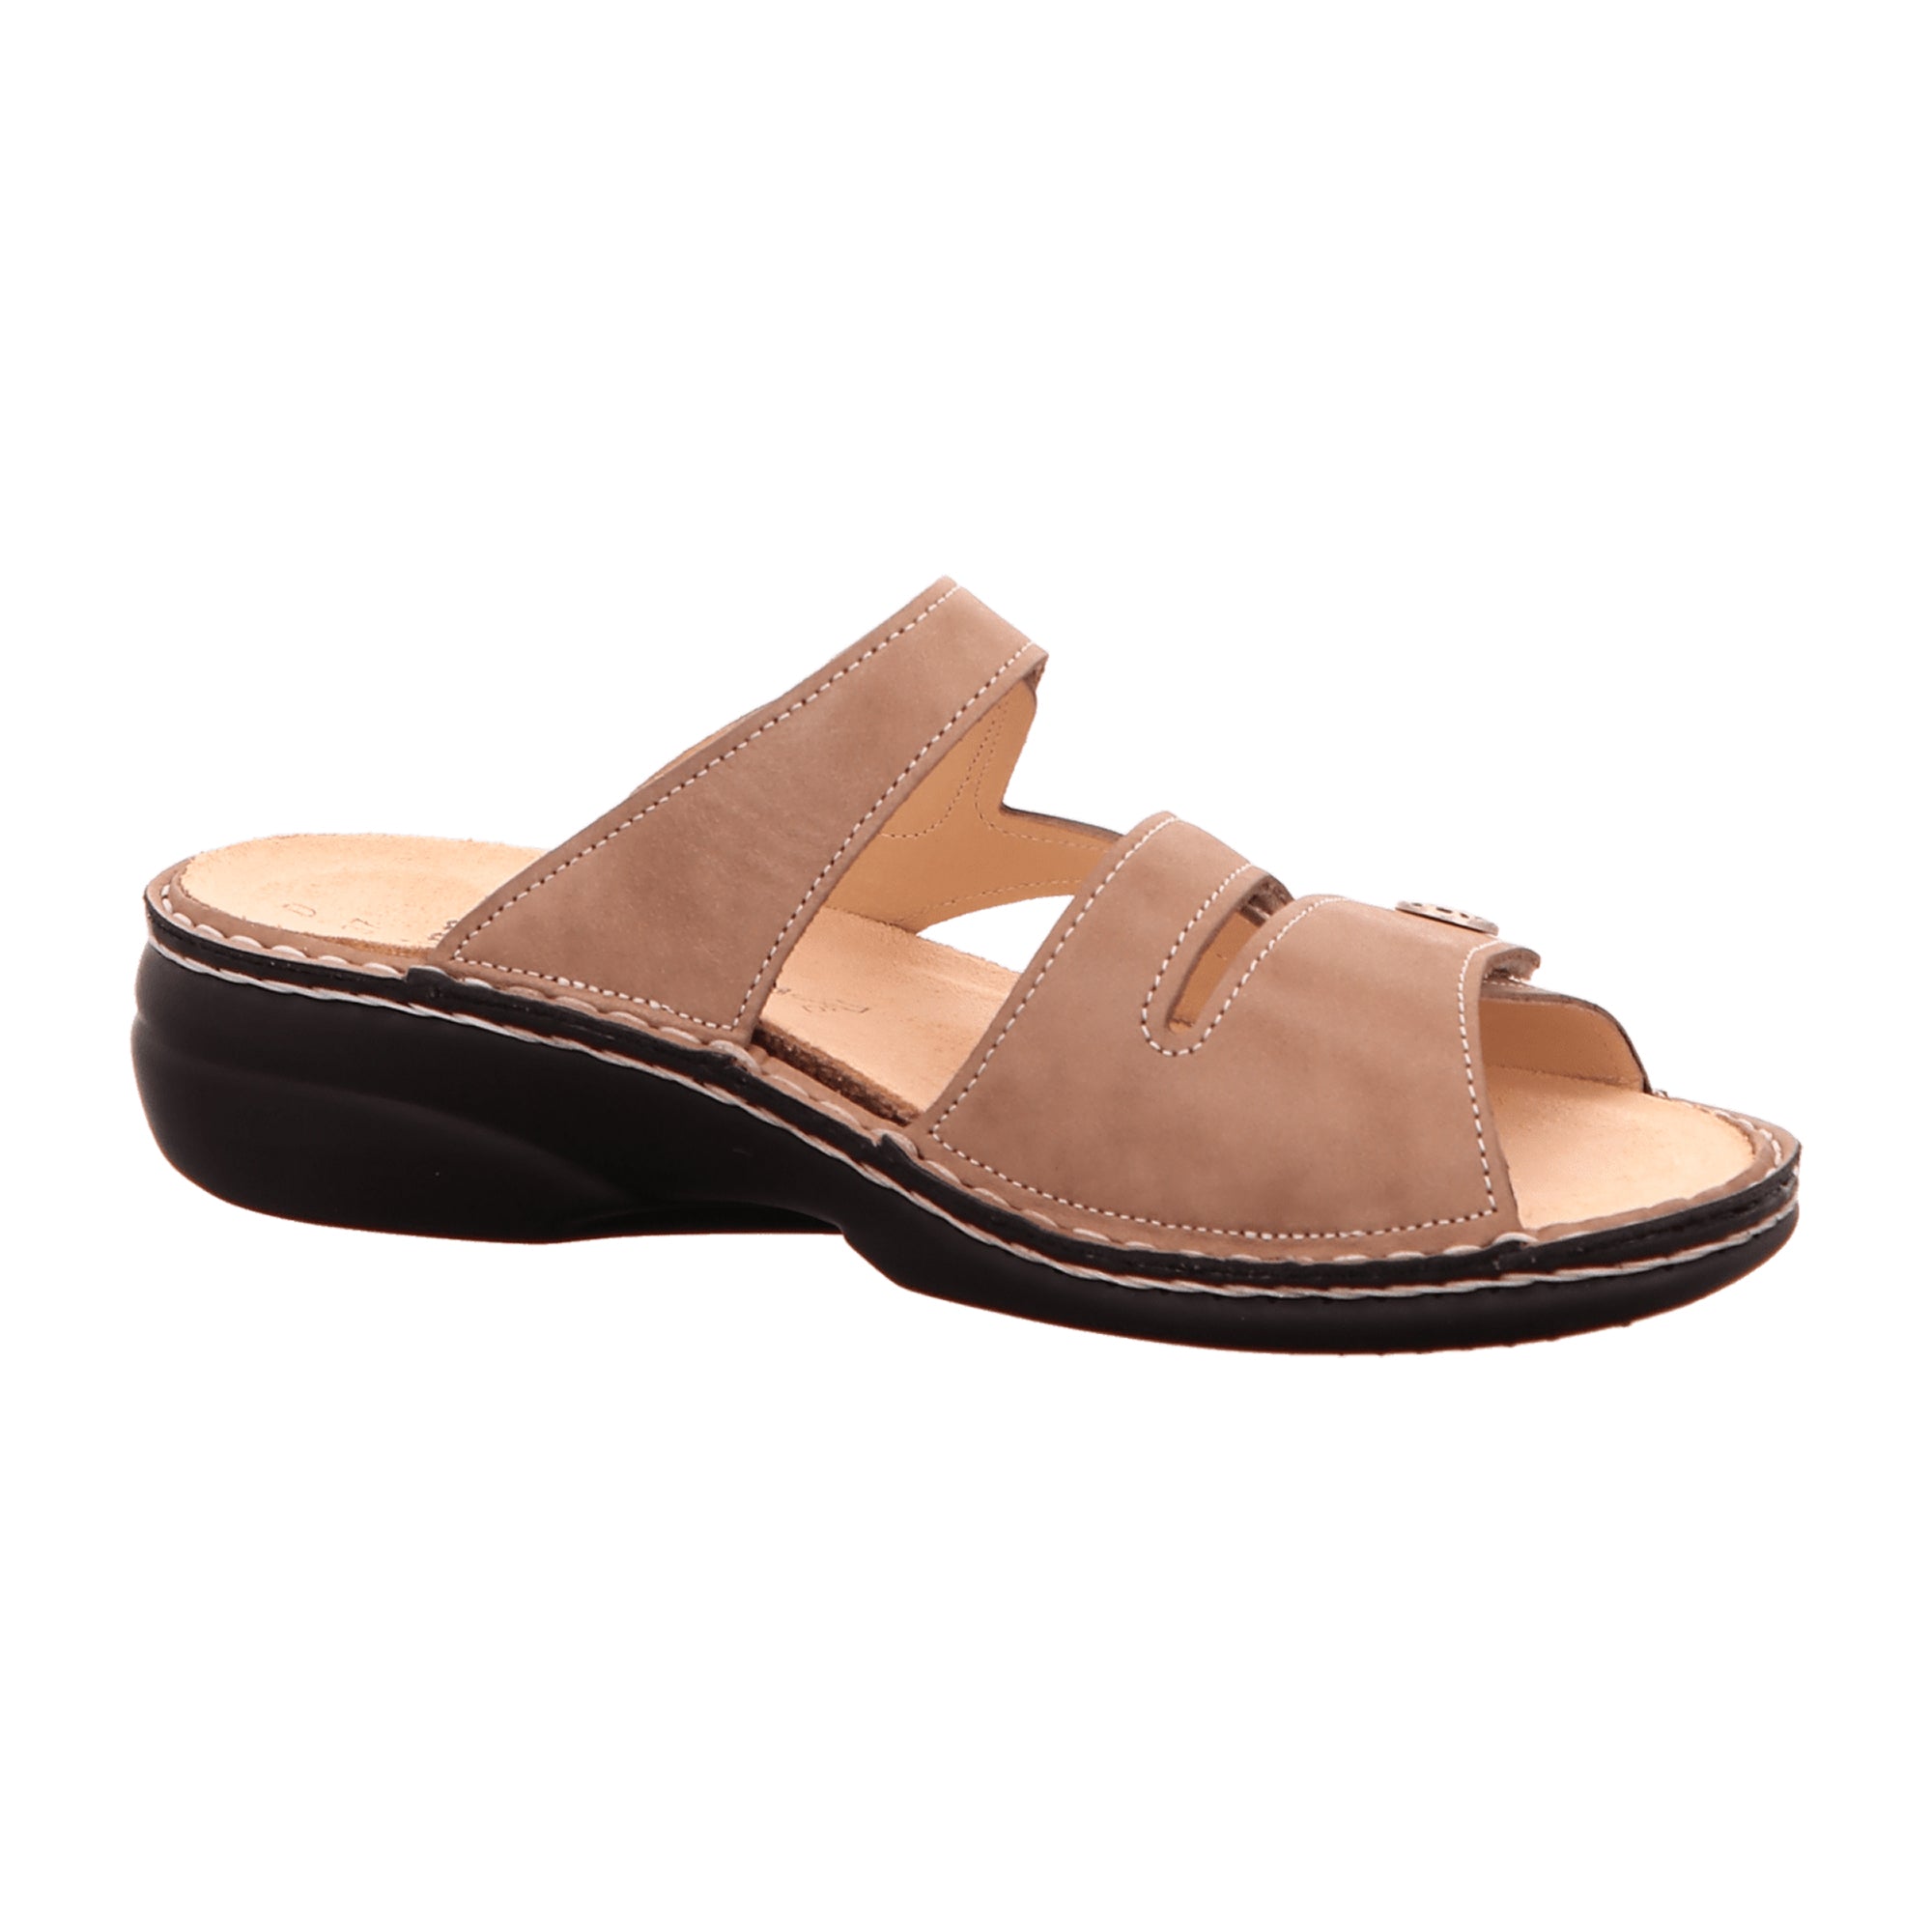 Finn Comfort Ventura-Soft Beige Sandals for Women - Comfortable Leather Slides with Adjustable Straps and Removable Insoles